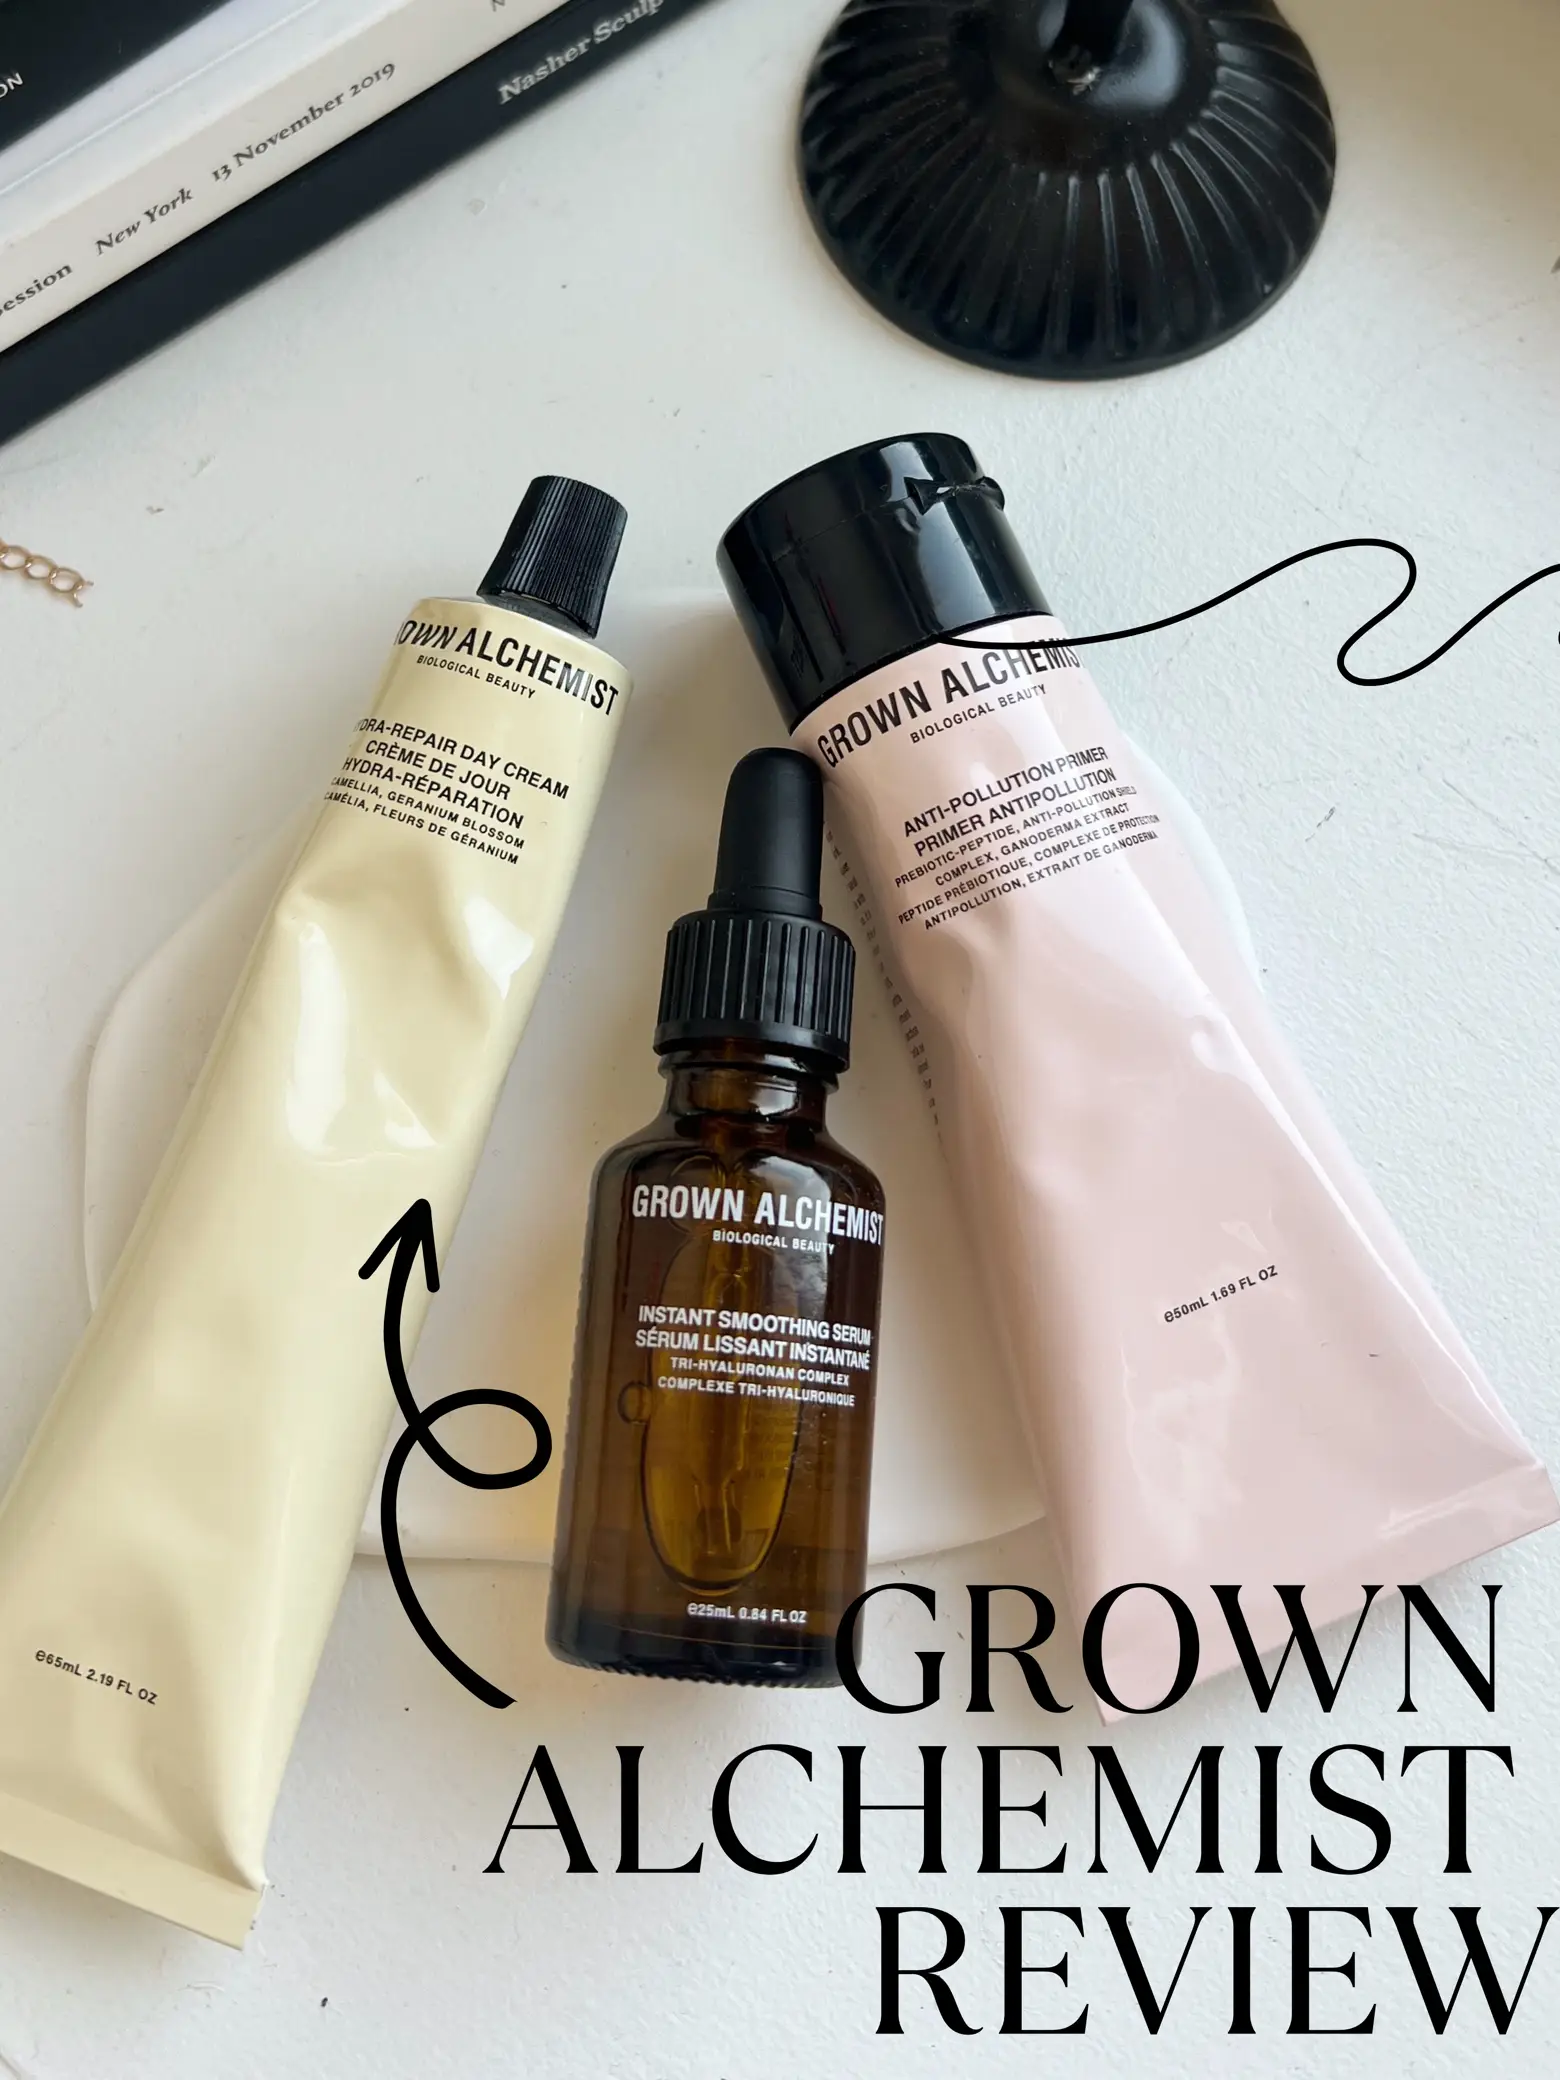 Gallery Grown Janet by Lemon8 posted | Review 🤌💋✨ | Alchemist